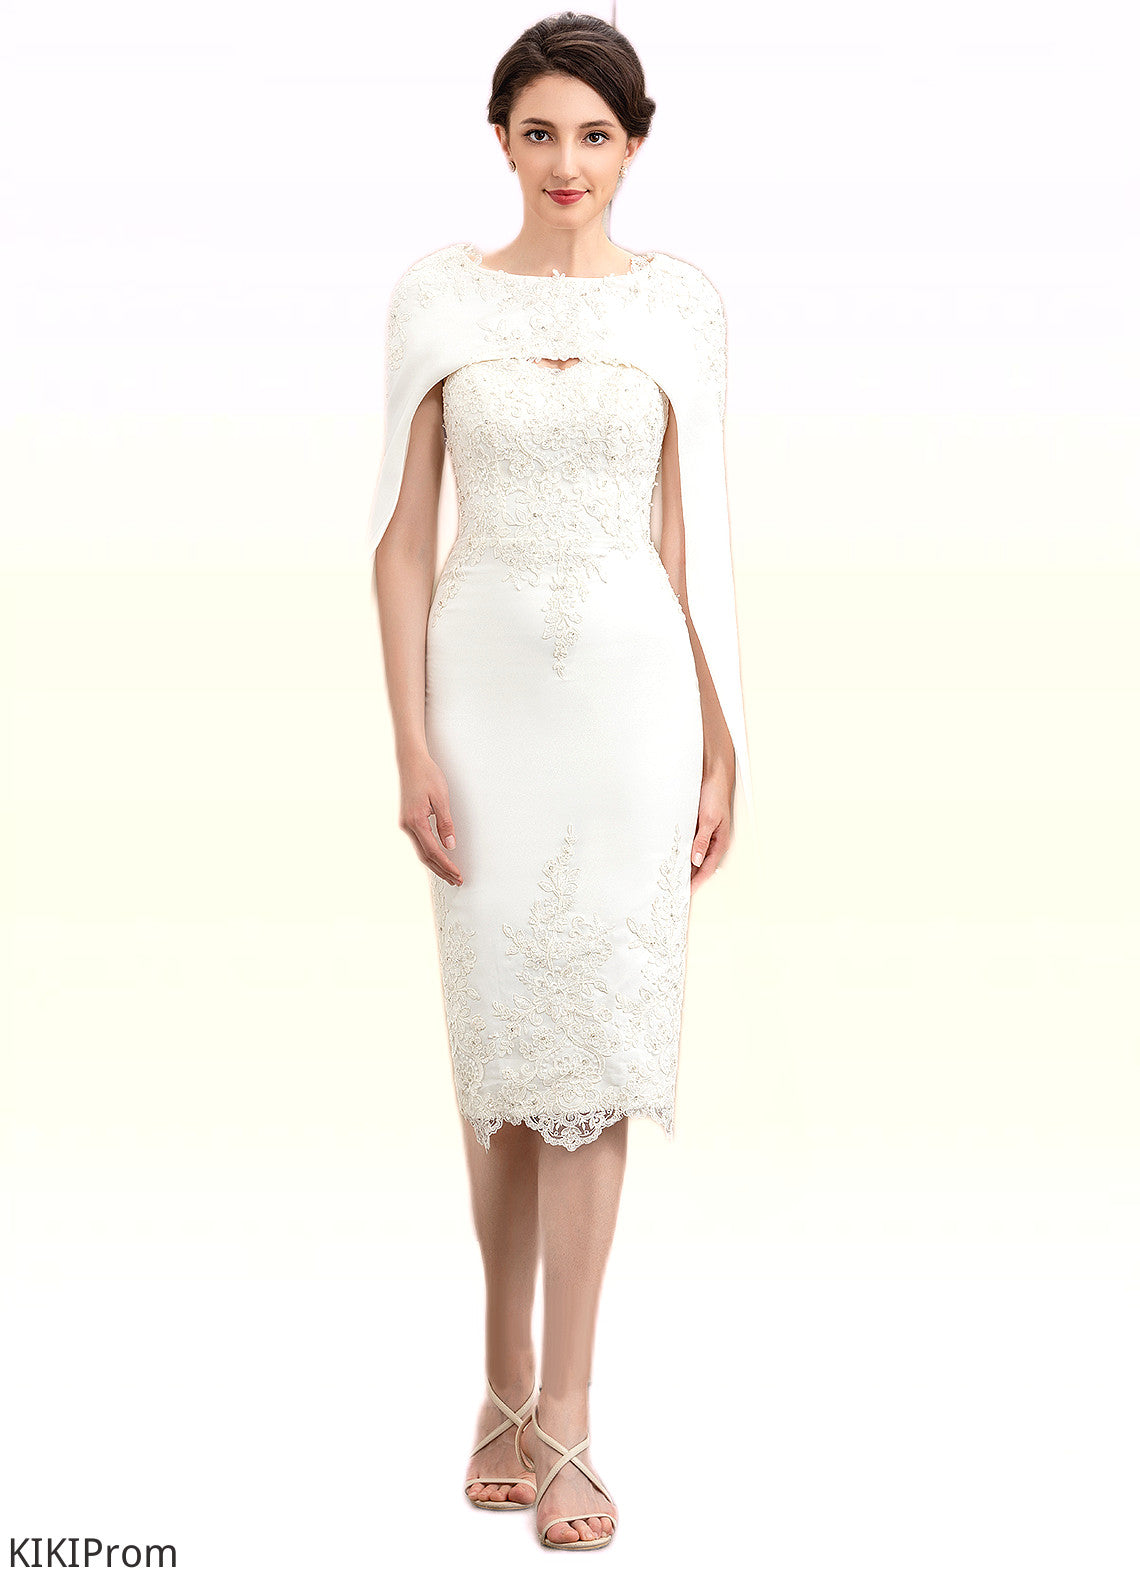 Ally Sheath/Column Sweetheart Knee-Length Lace Stretch Crepe Mother of the Bride Dress With Beading DZ126P0014973